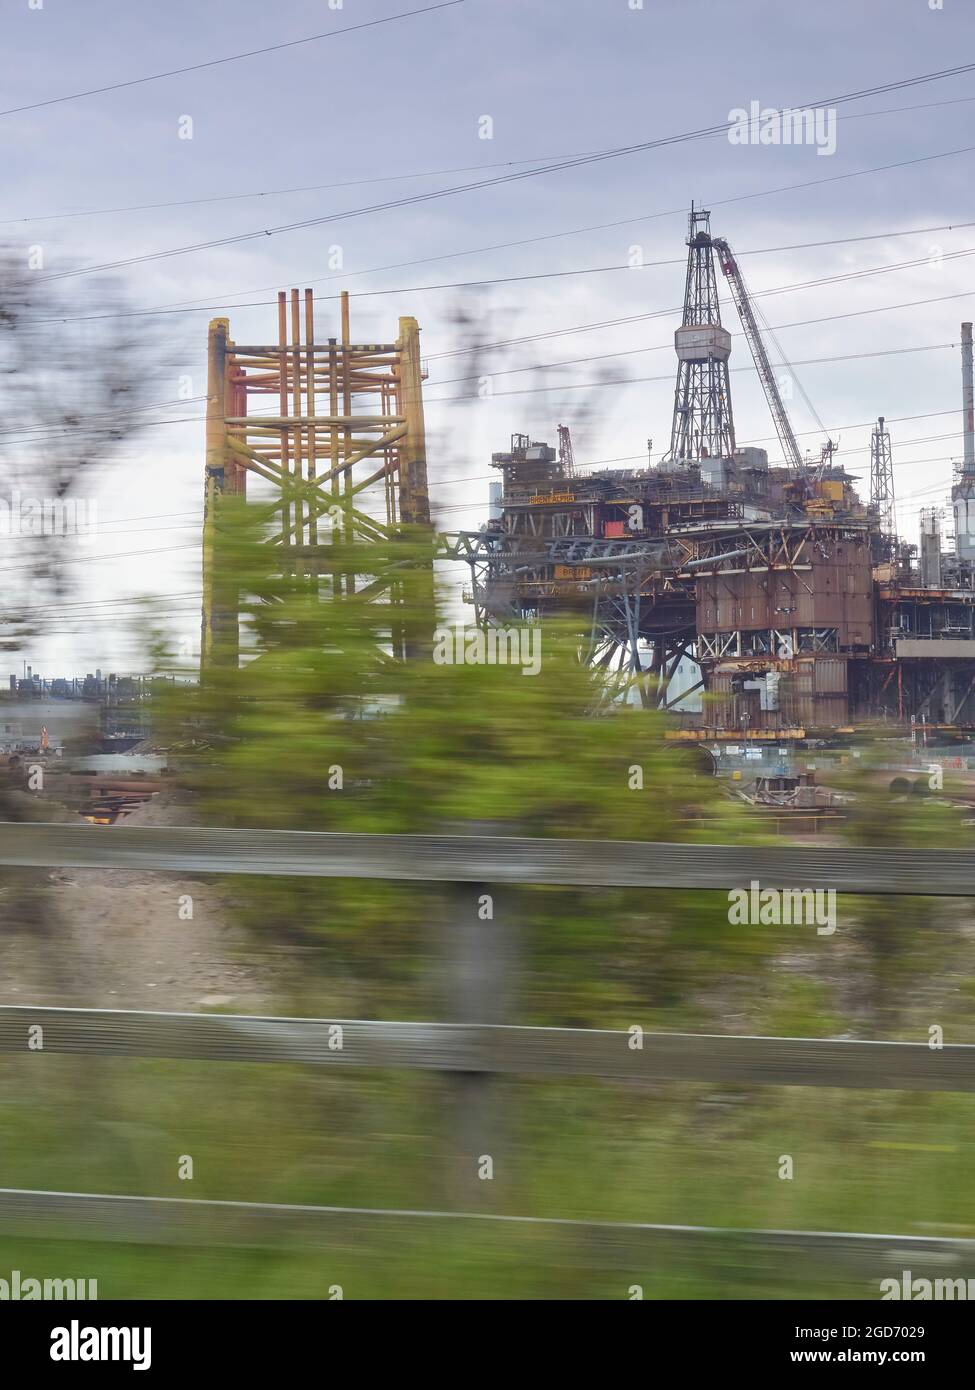 An offshore platform being decommissioned - shot from a moving car, the motion renders the trees fragile and ephemeral, in contrast with the rig. Stock Photo